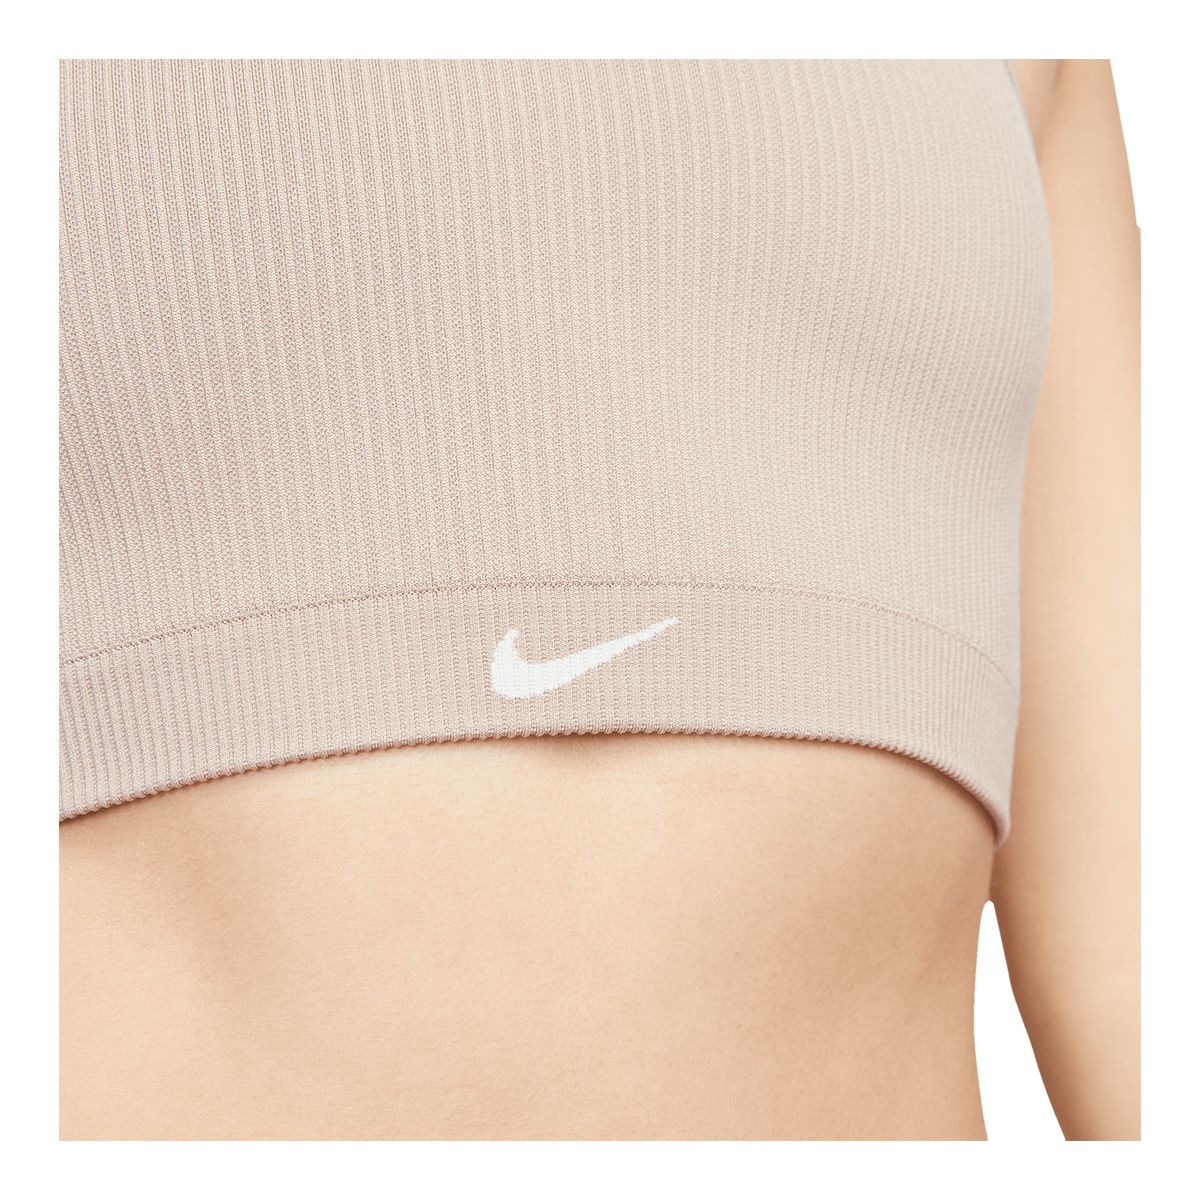 Nike Women's Indy Dri-Fit Light-Support Non-Padded Sports Bra (as1